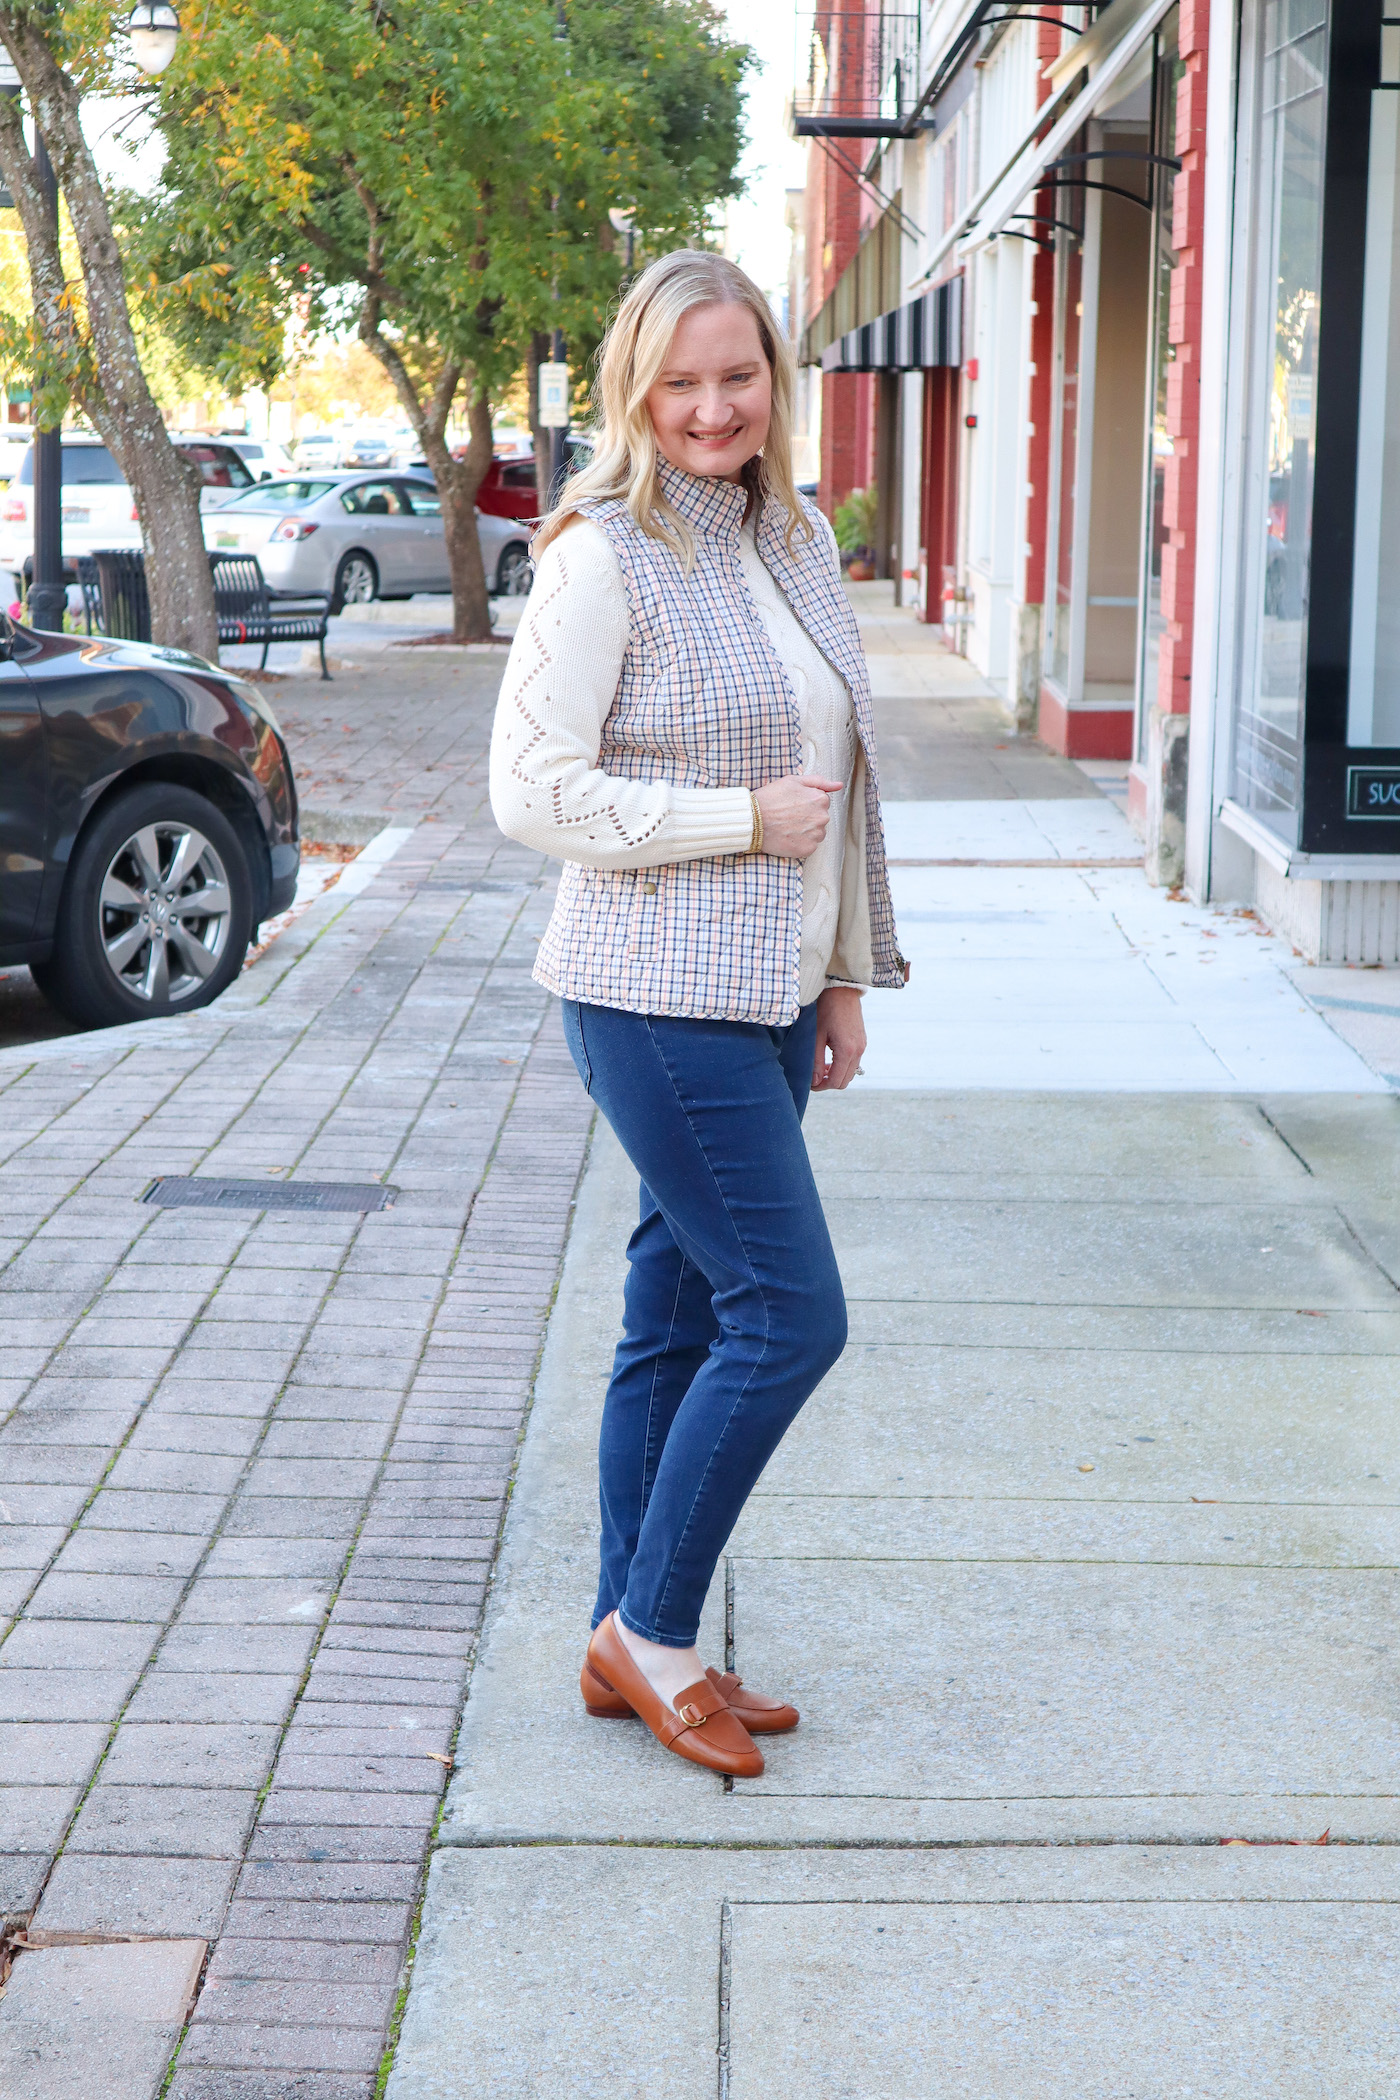 Classic Fall Style with Talbots - Classy Yet Trendy